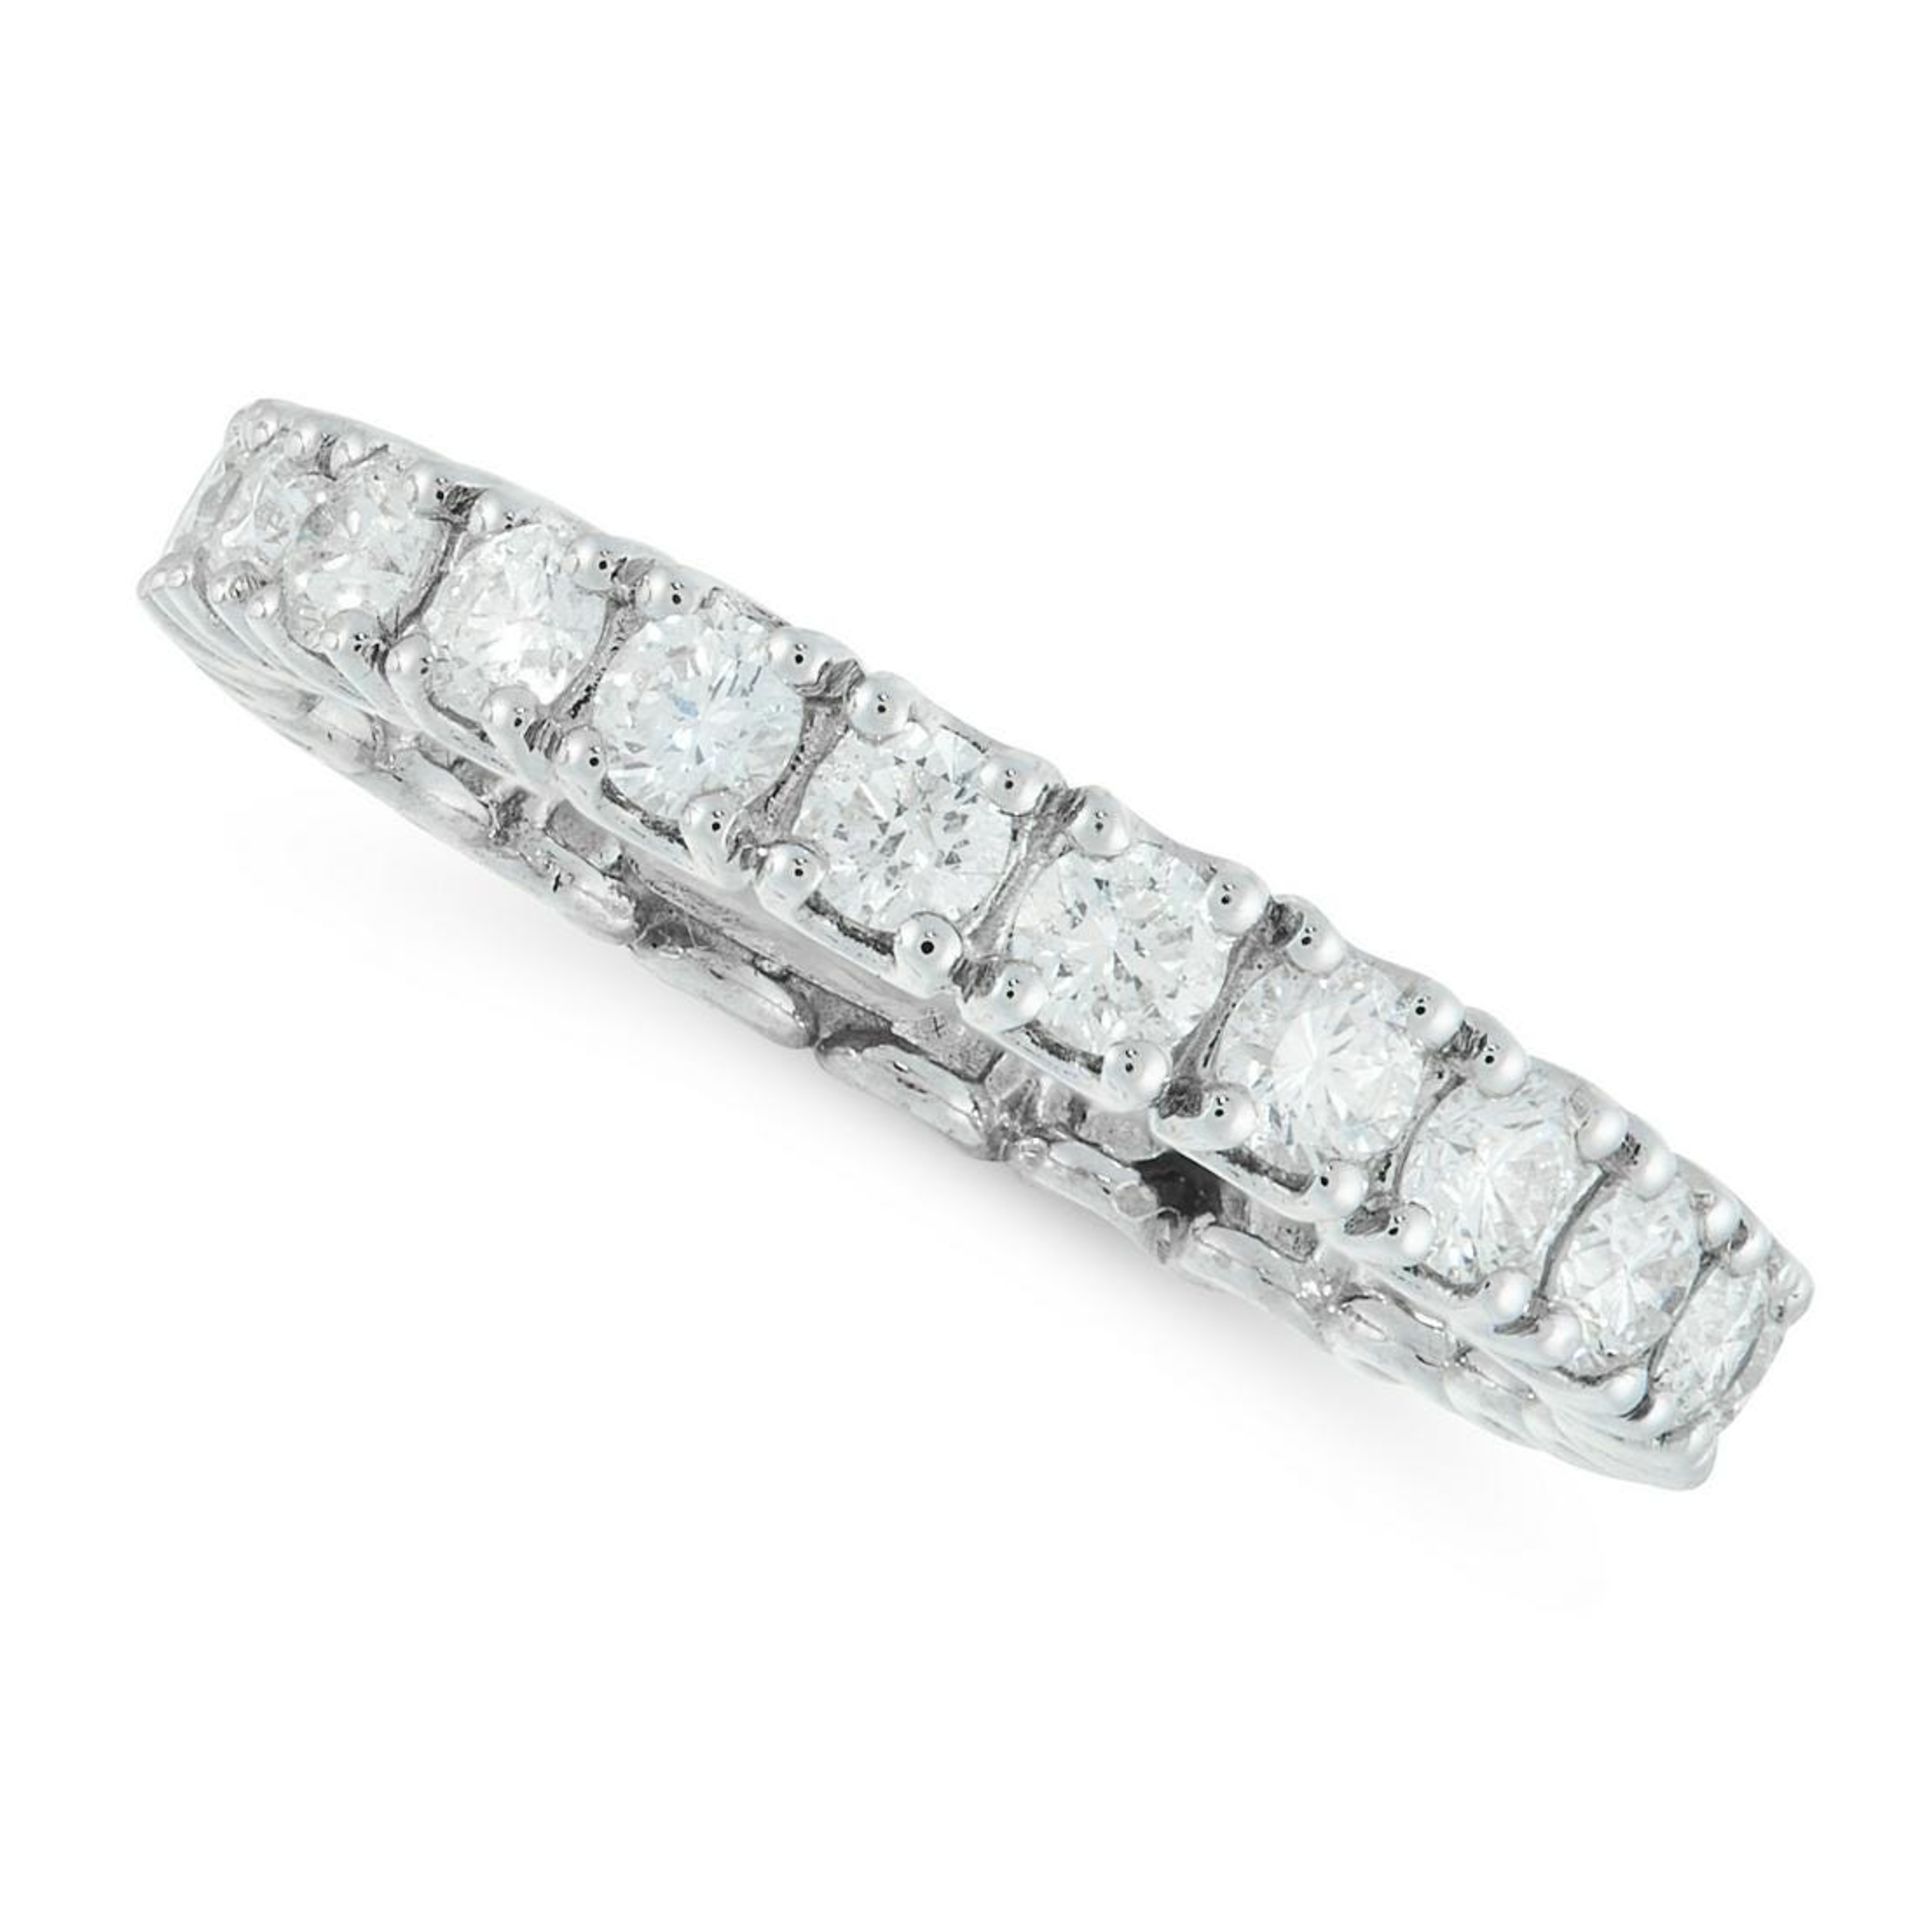 DIAMOND ETERNITY BAND RING designed as a full eternity, set with round cut diamonds on a flexible